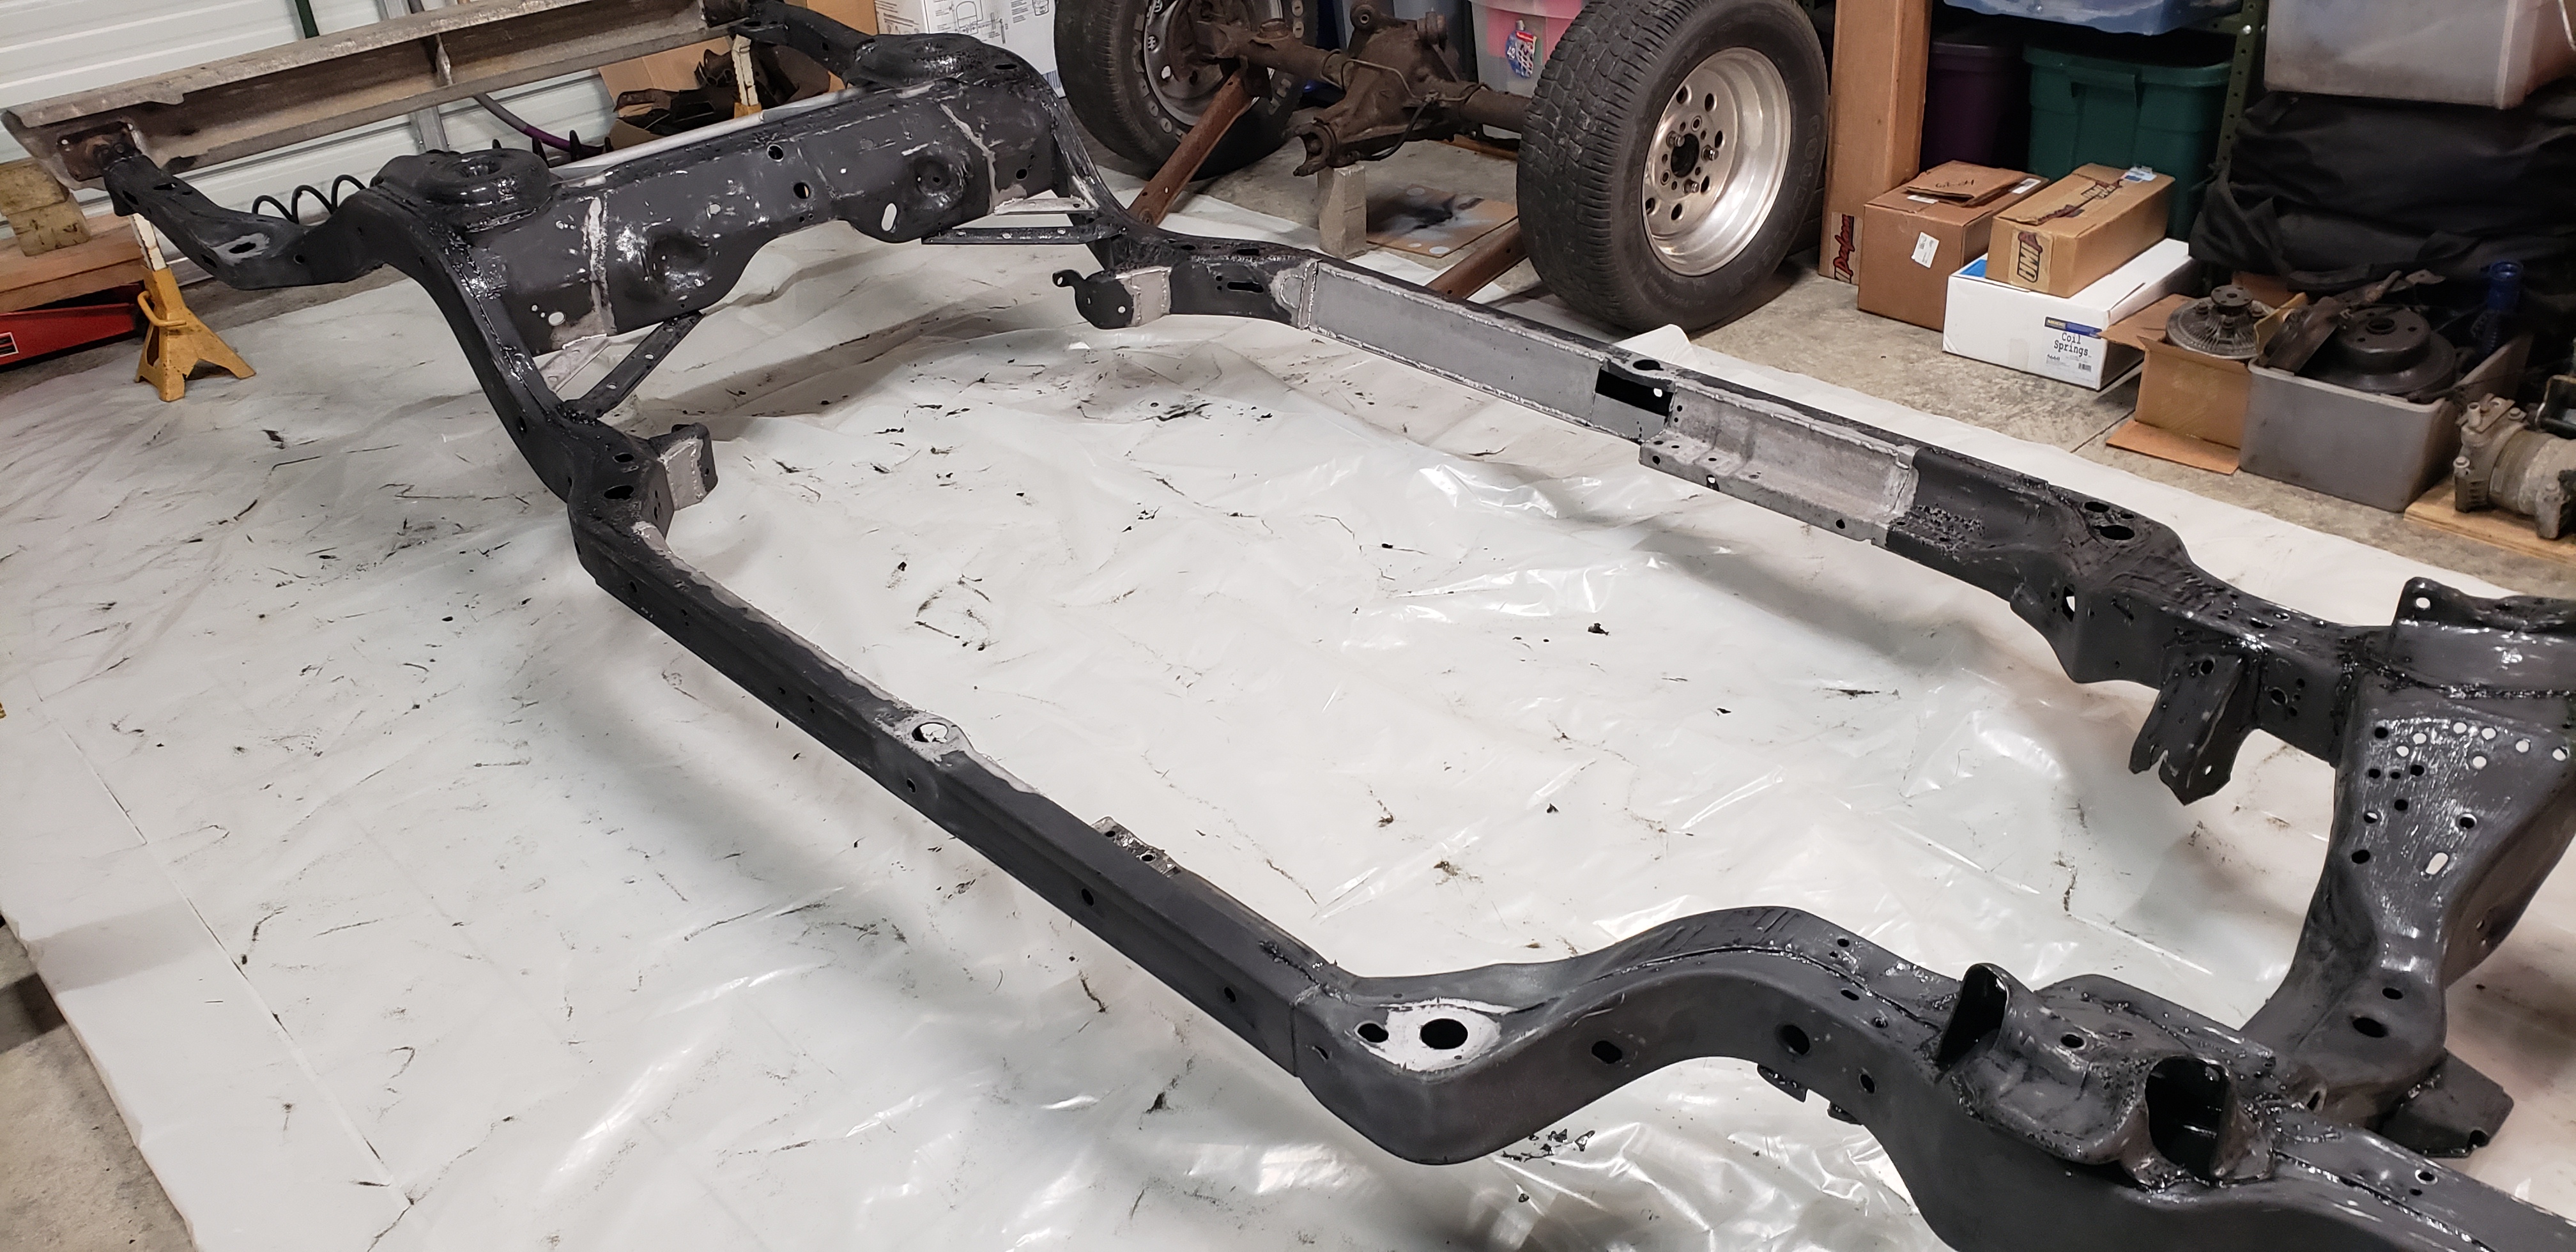 New Frame Prep For Paint After Repair And Modification (11).jpg